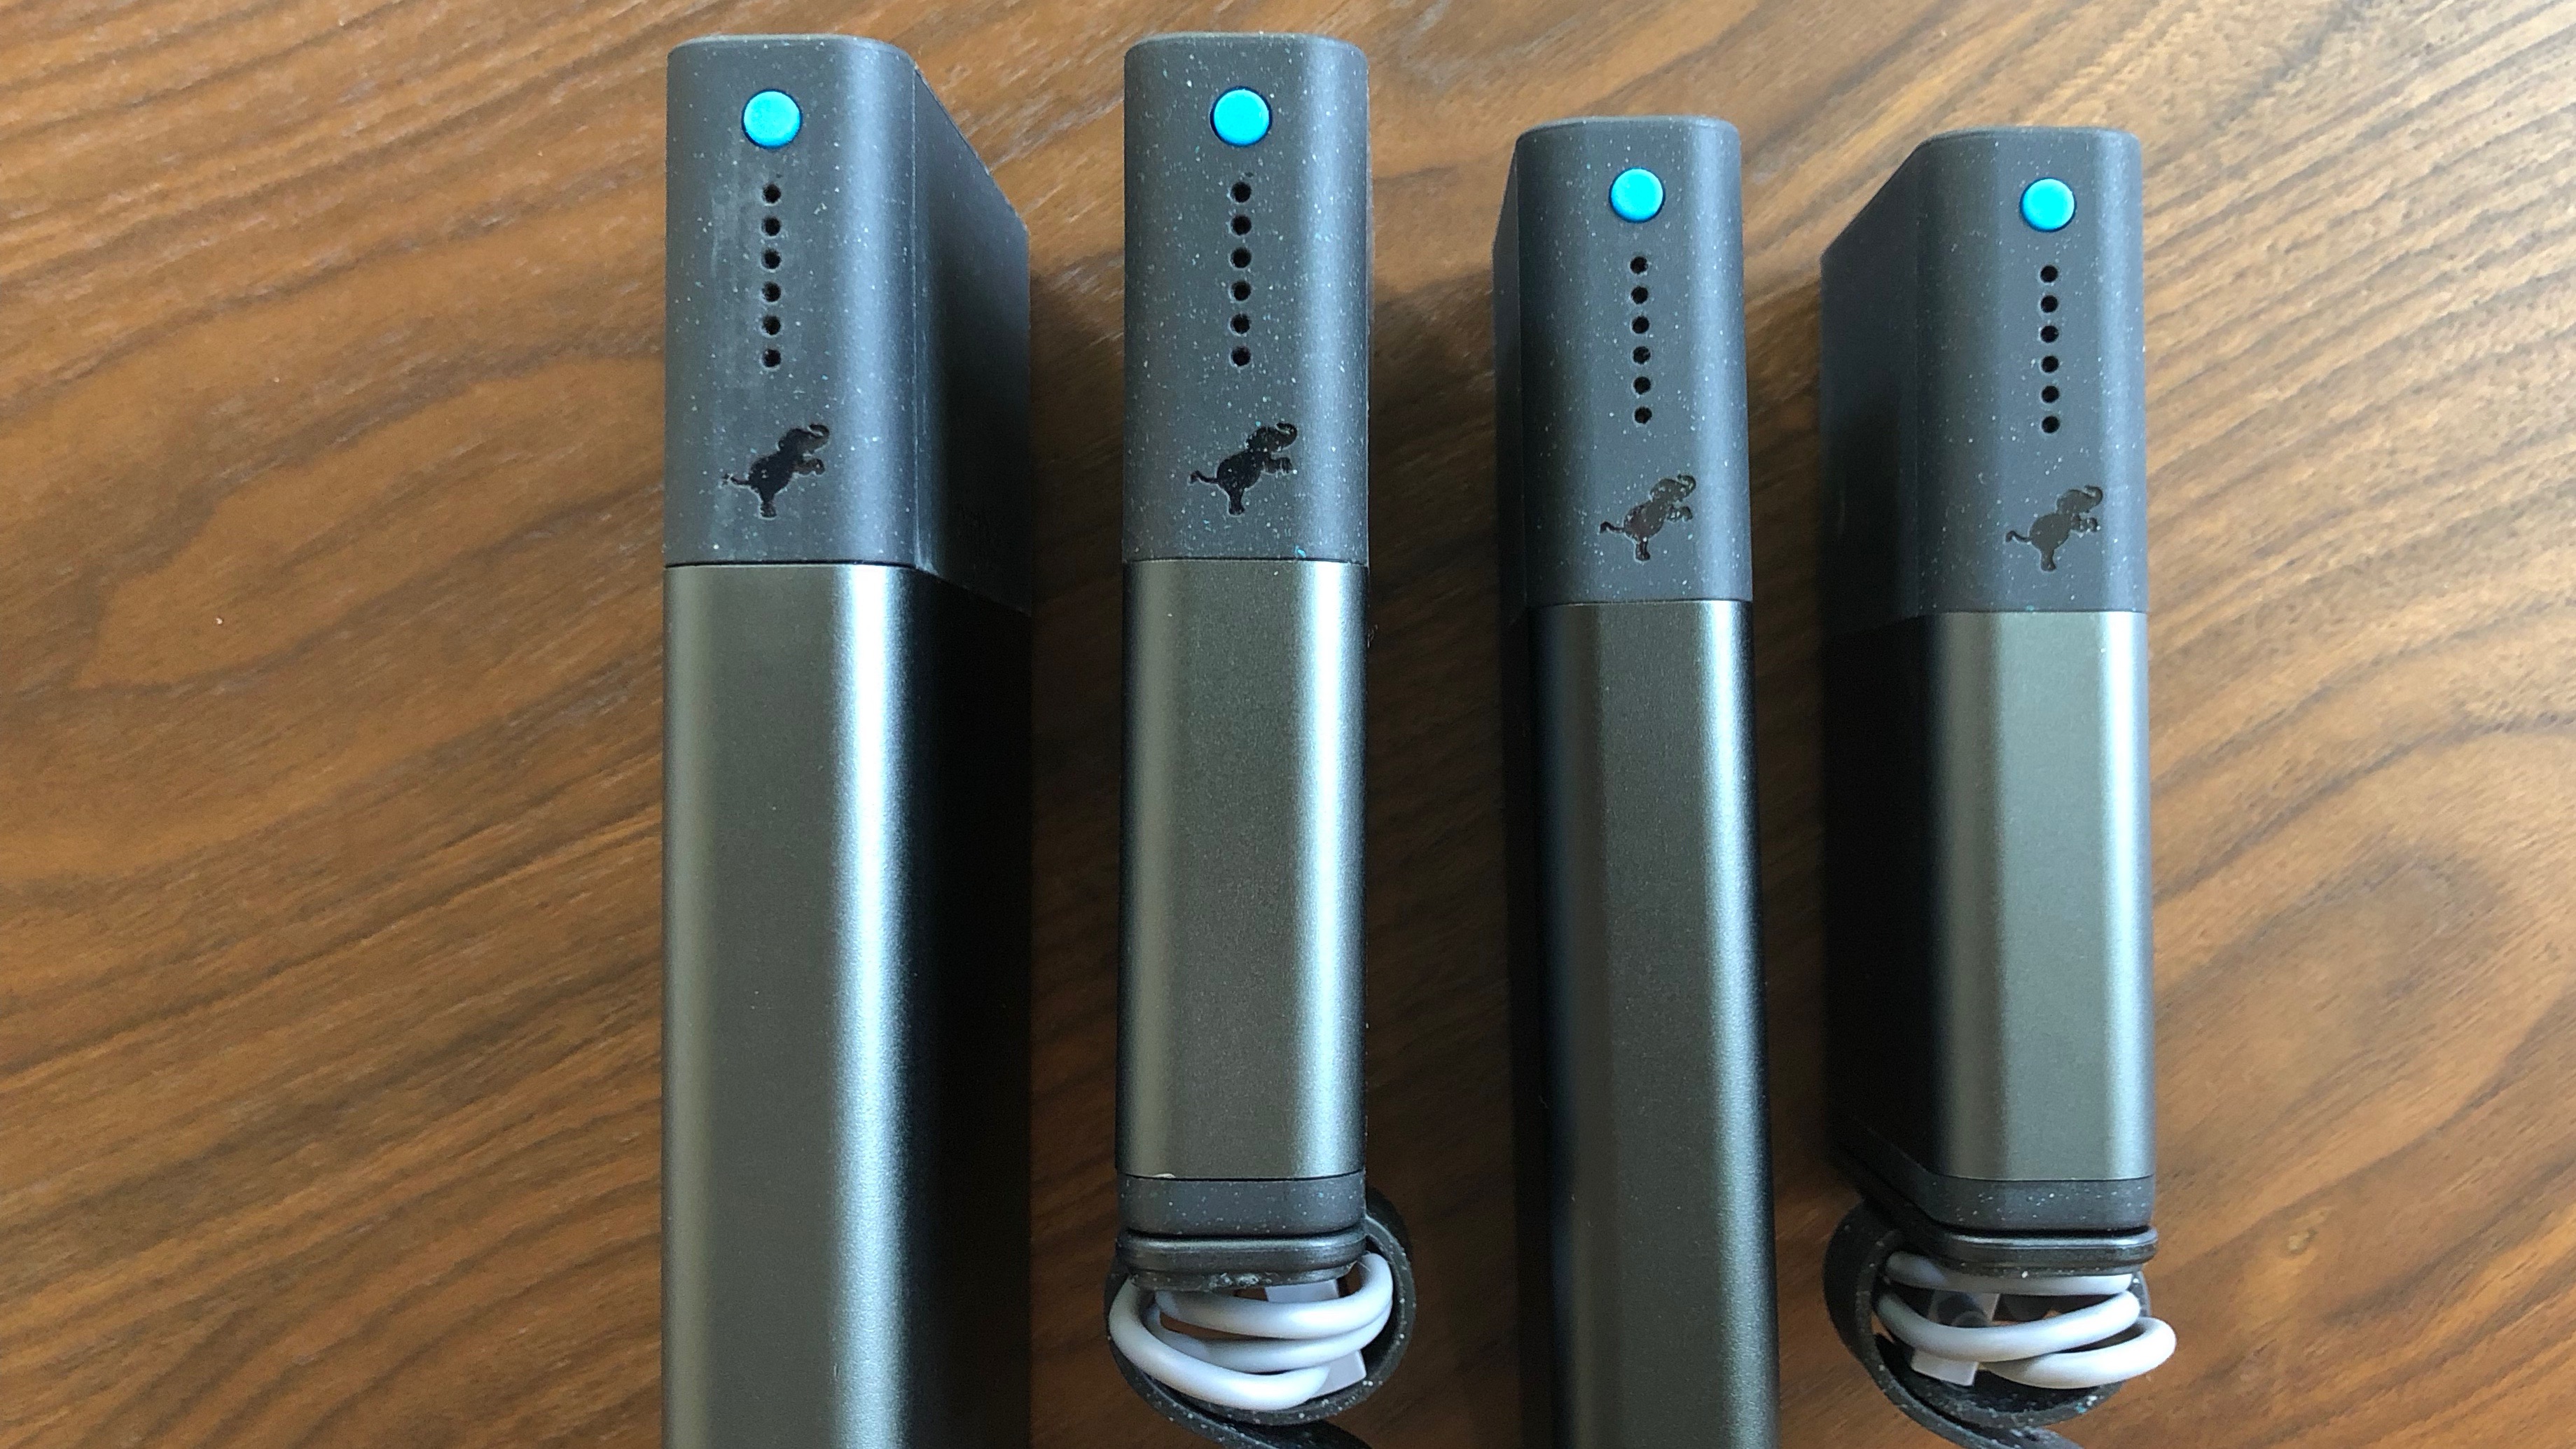 nimble portable charger review